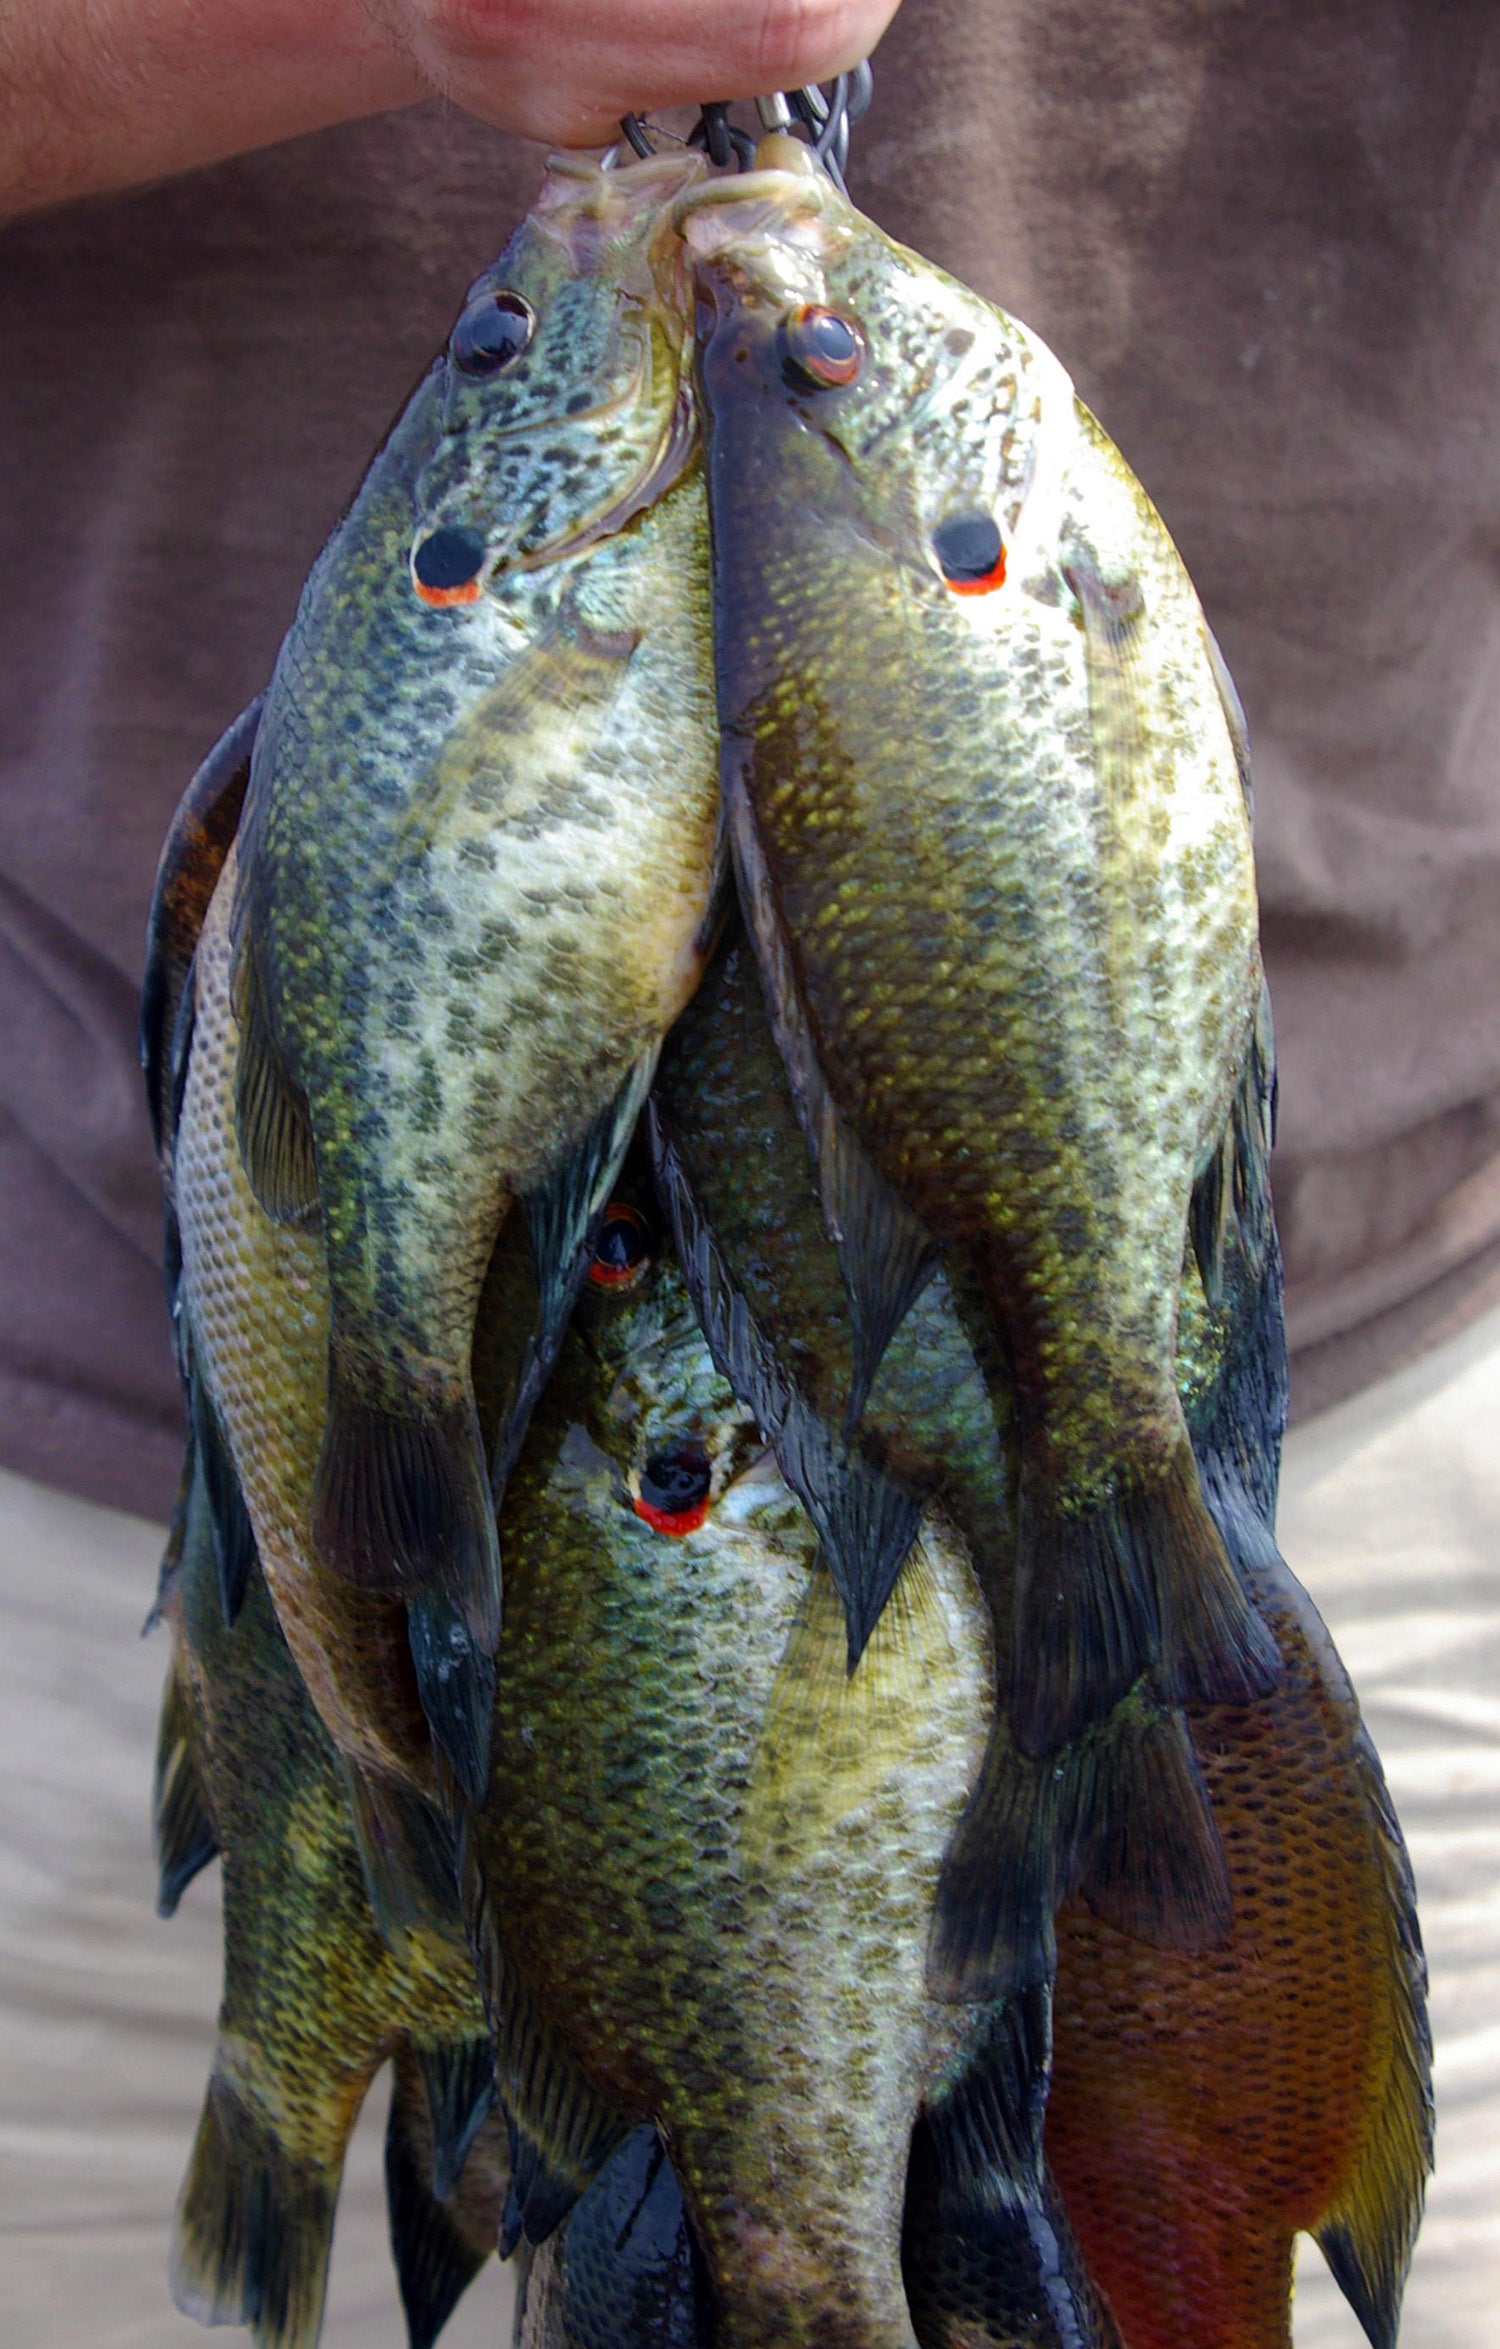 Group of panfish on a stringer